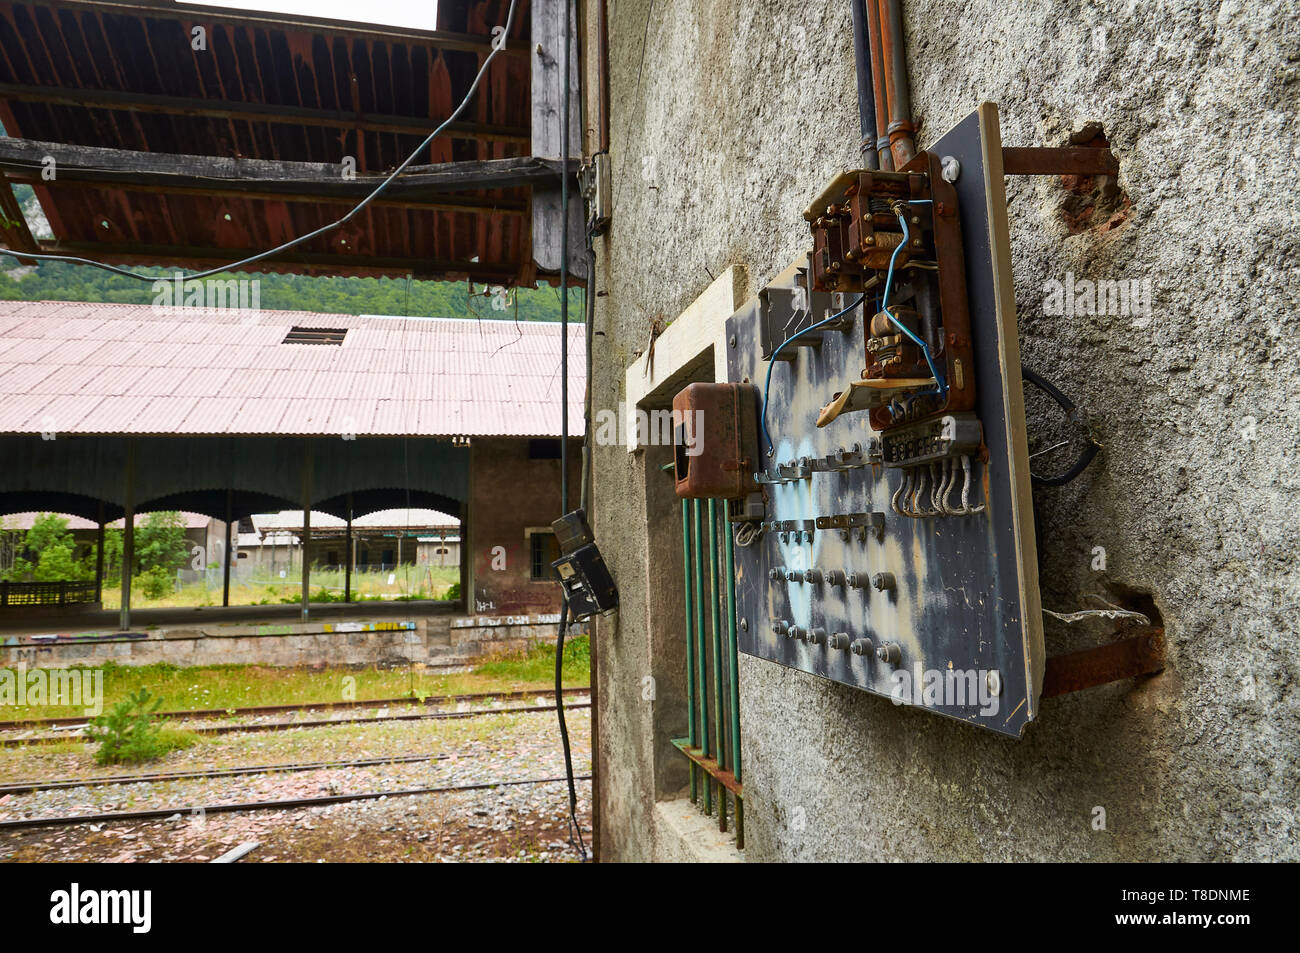 Rusty old distribution panel and electric meter at the abandoned Canfranc International railway station (Canfranc, Pyrenees, Huesca, Aragon, Spain) Stock Photo